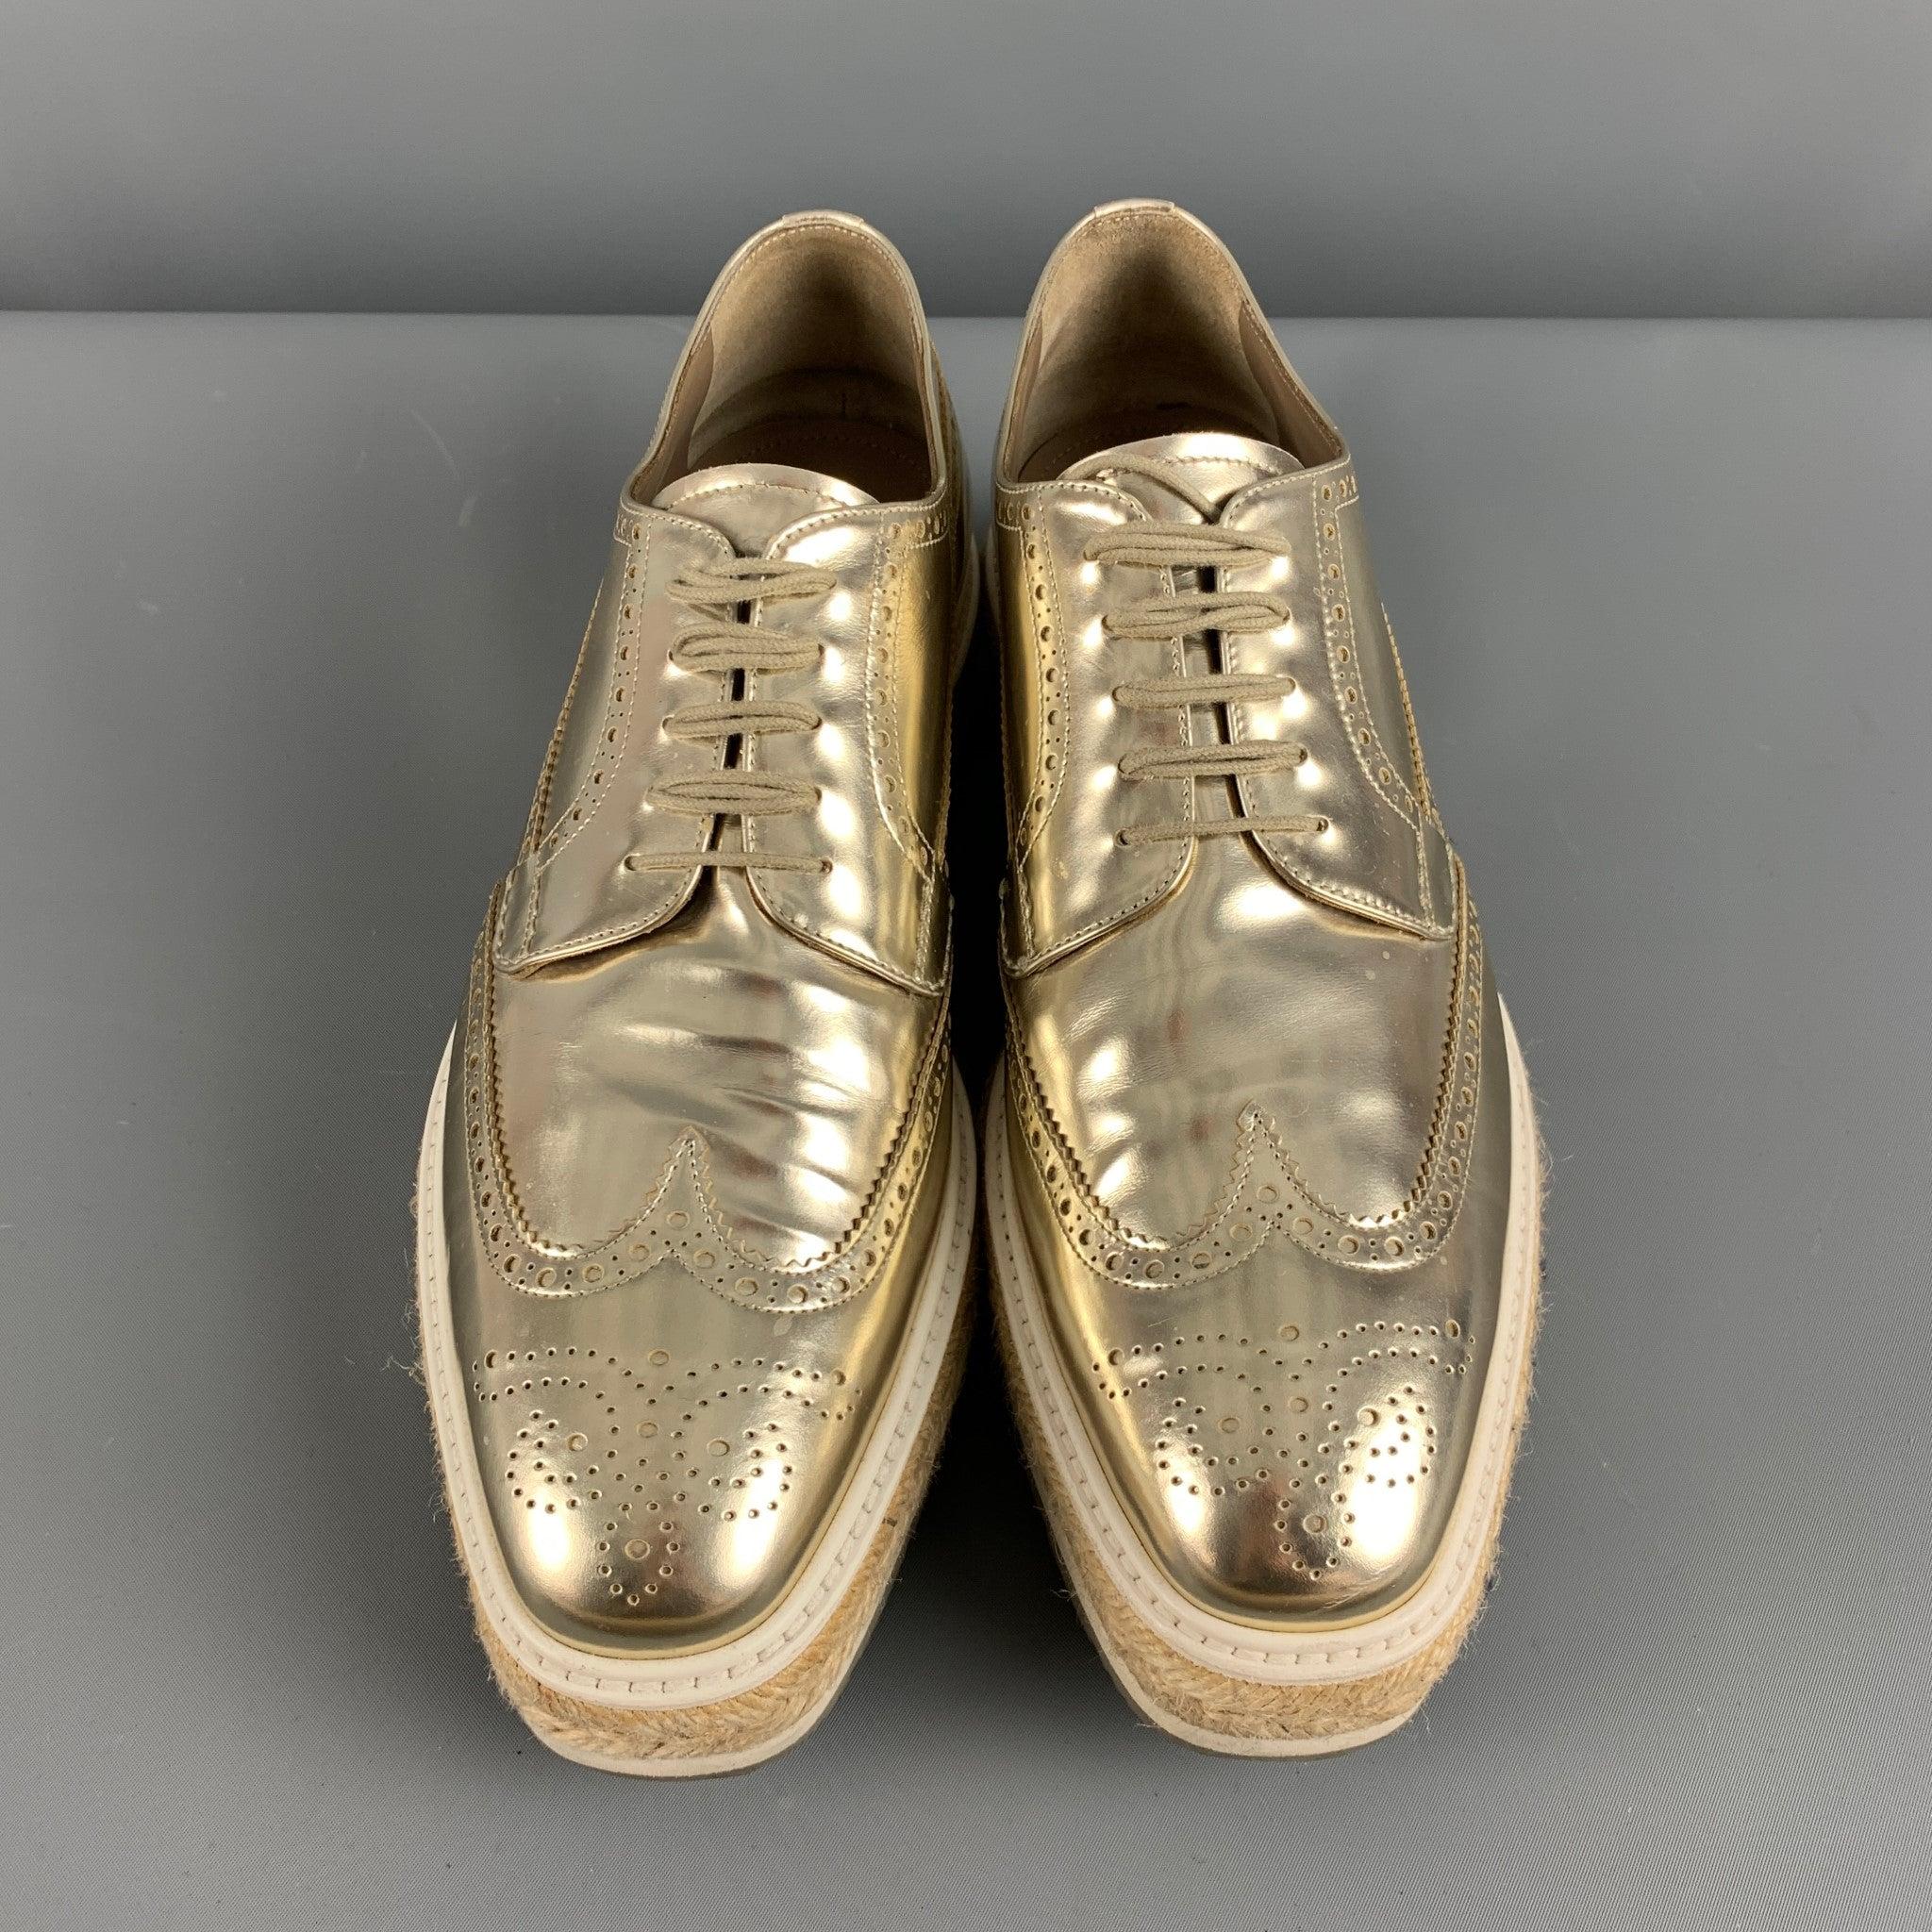 Men's PRADA Size 10 Gold Perforated Leather Platform Lace Up Shoes For Sale